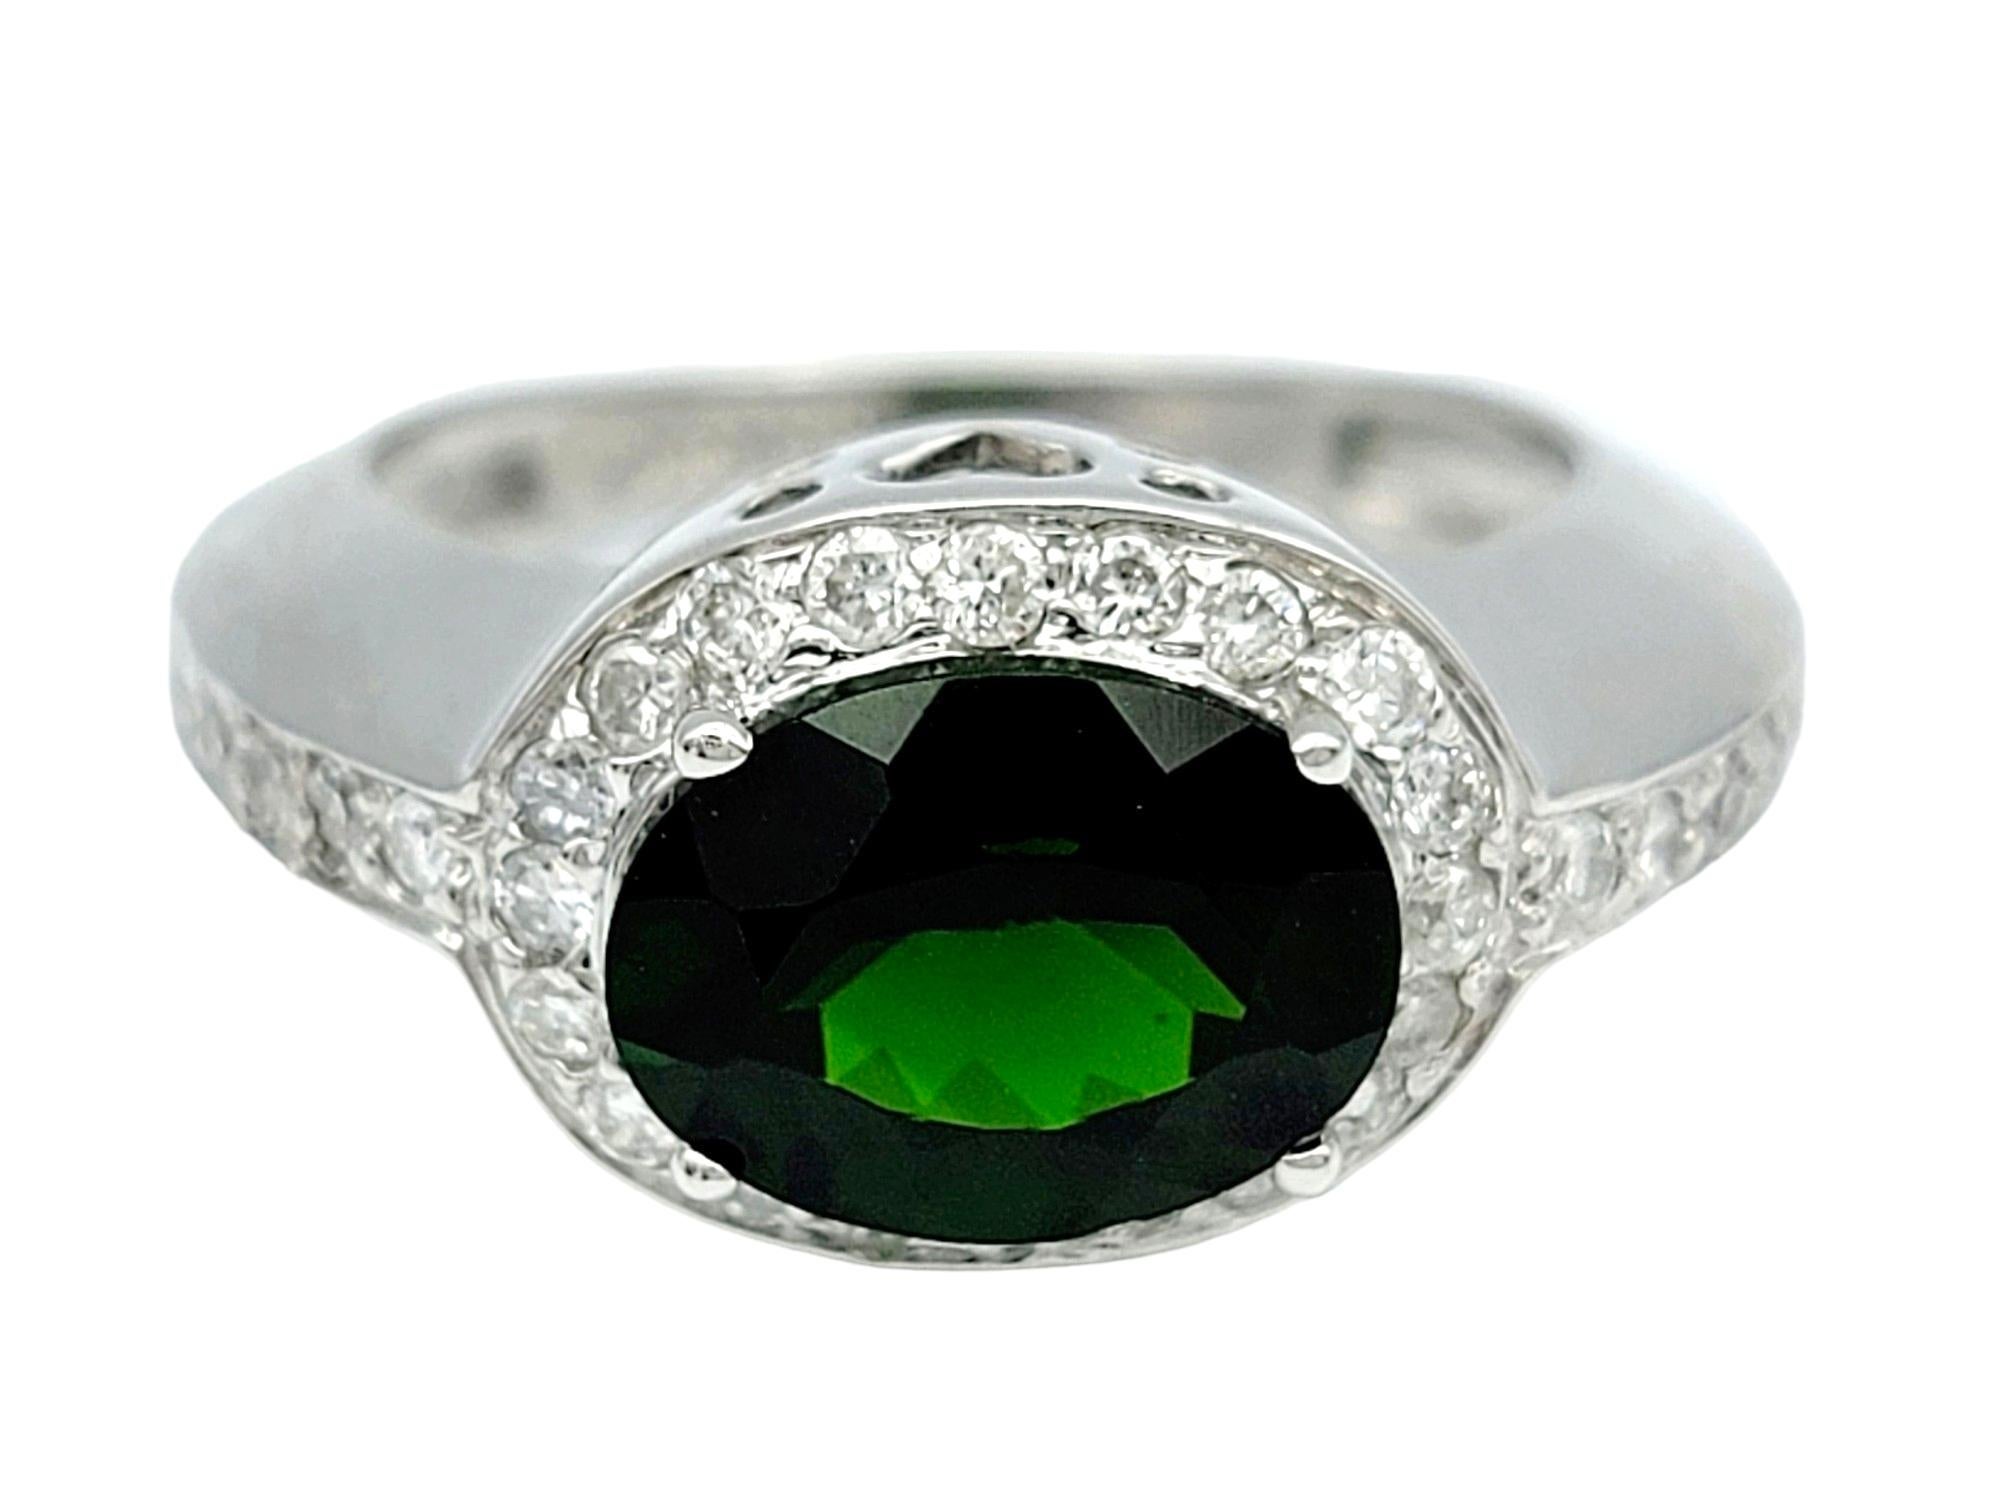 Ring Size: 5.25

Exuding a captivating allure, this ring features a mesmerizing oval chrome diopside embraced by a radiant halo of diamonds, all elegantly horizontally set in lustrous 14 karat white gold. The deep, lush green hue of the chrome